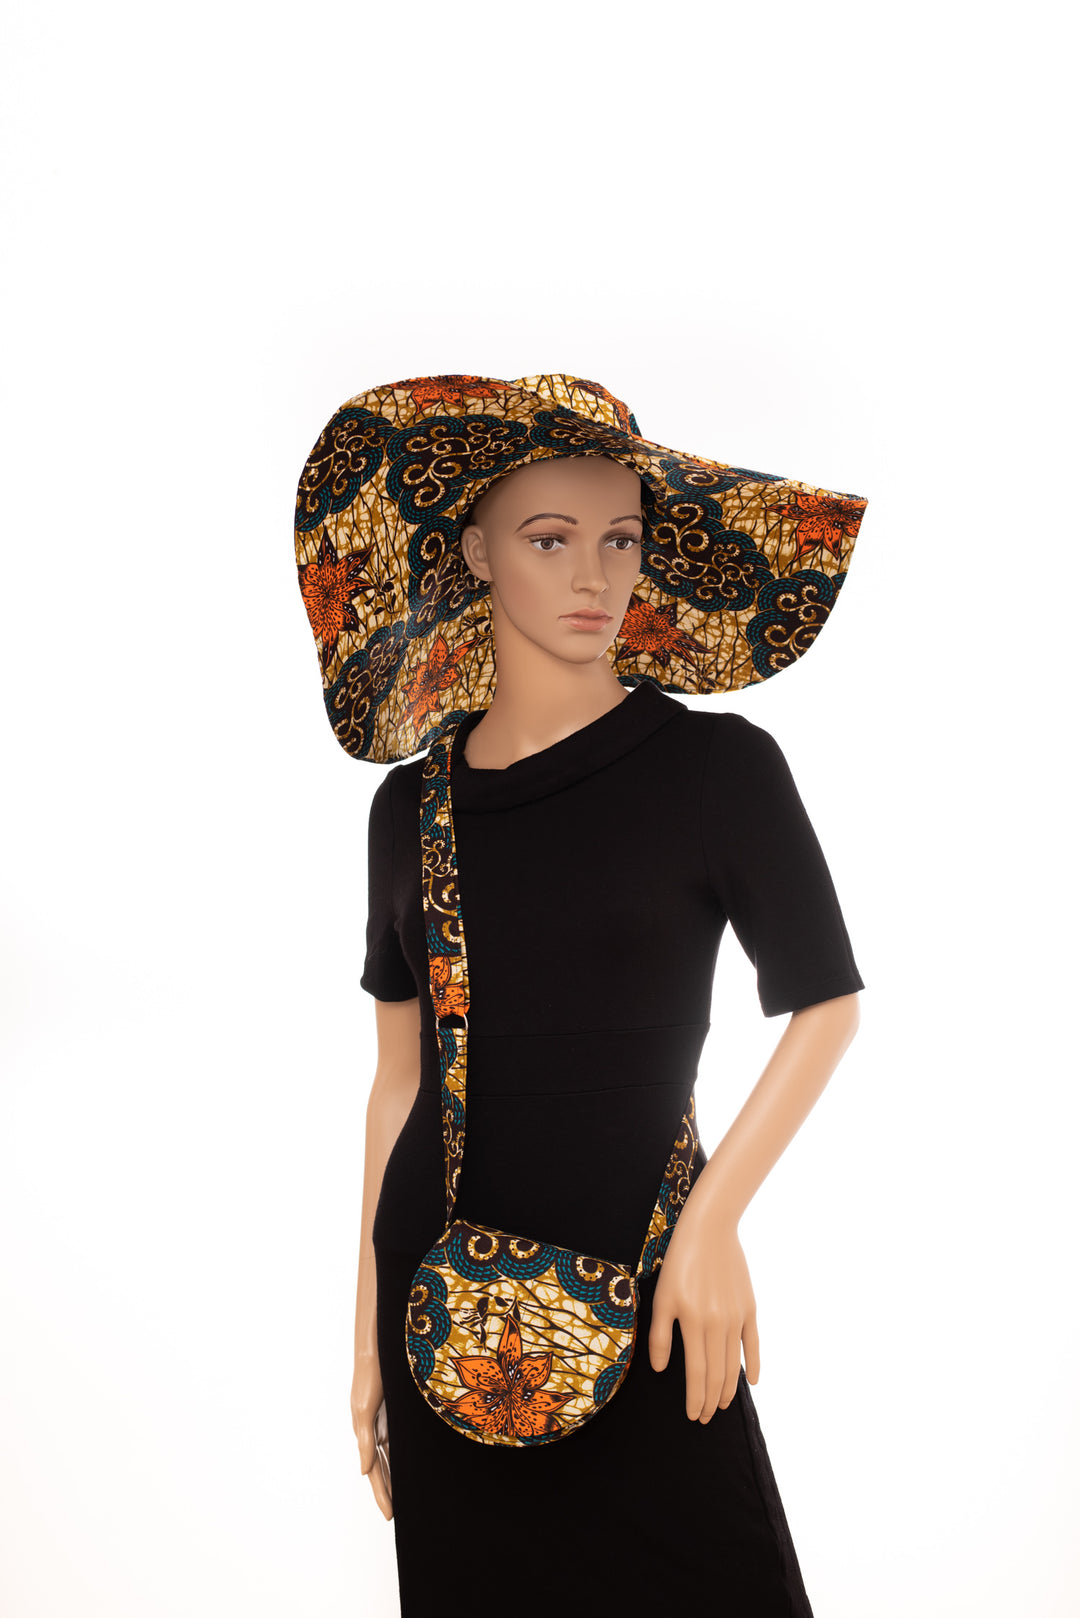 Women's Protective Summer Sun Hat with Matching Crossbody Bag in Brown/ Orange Colou